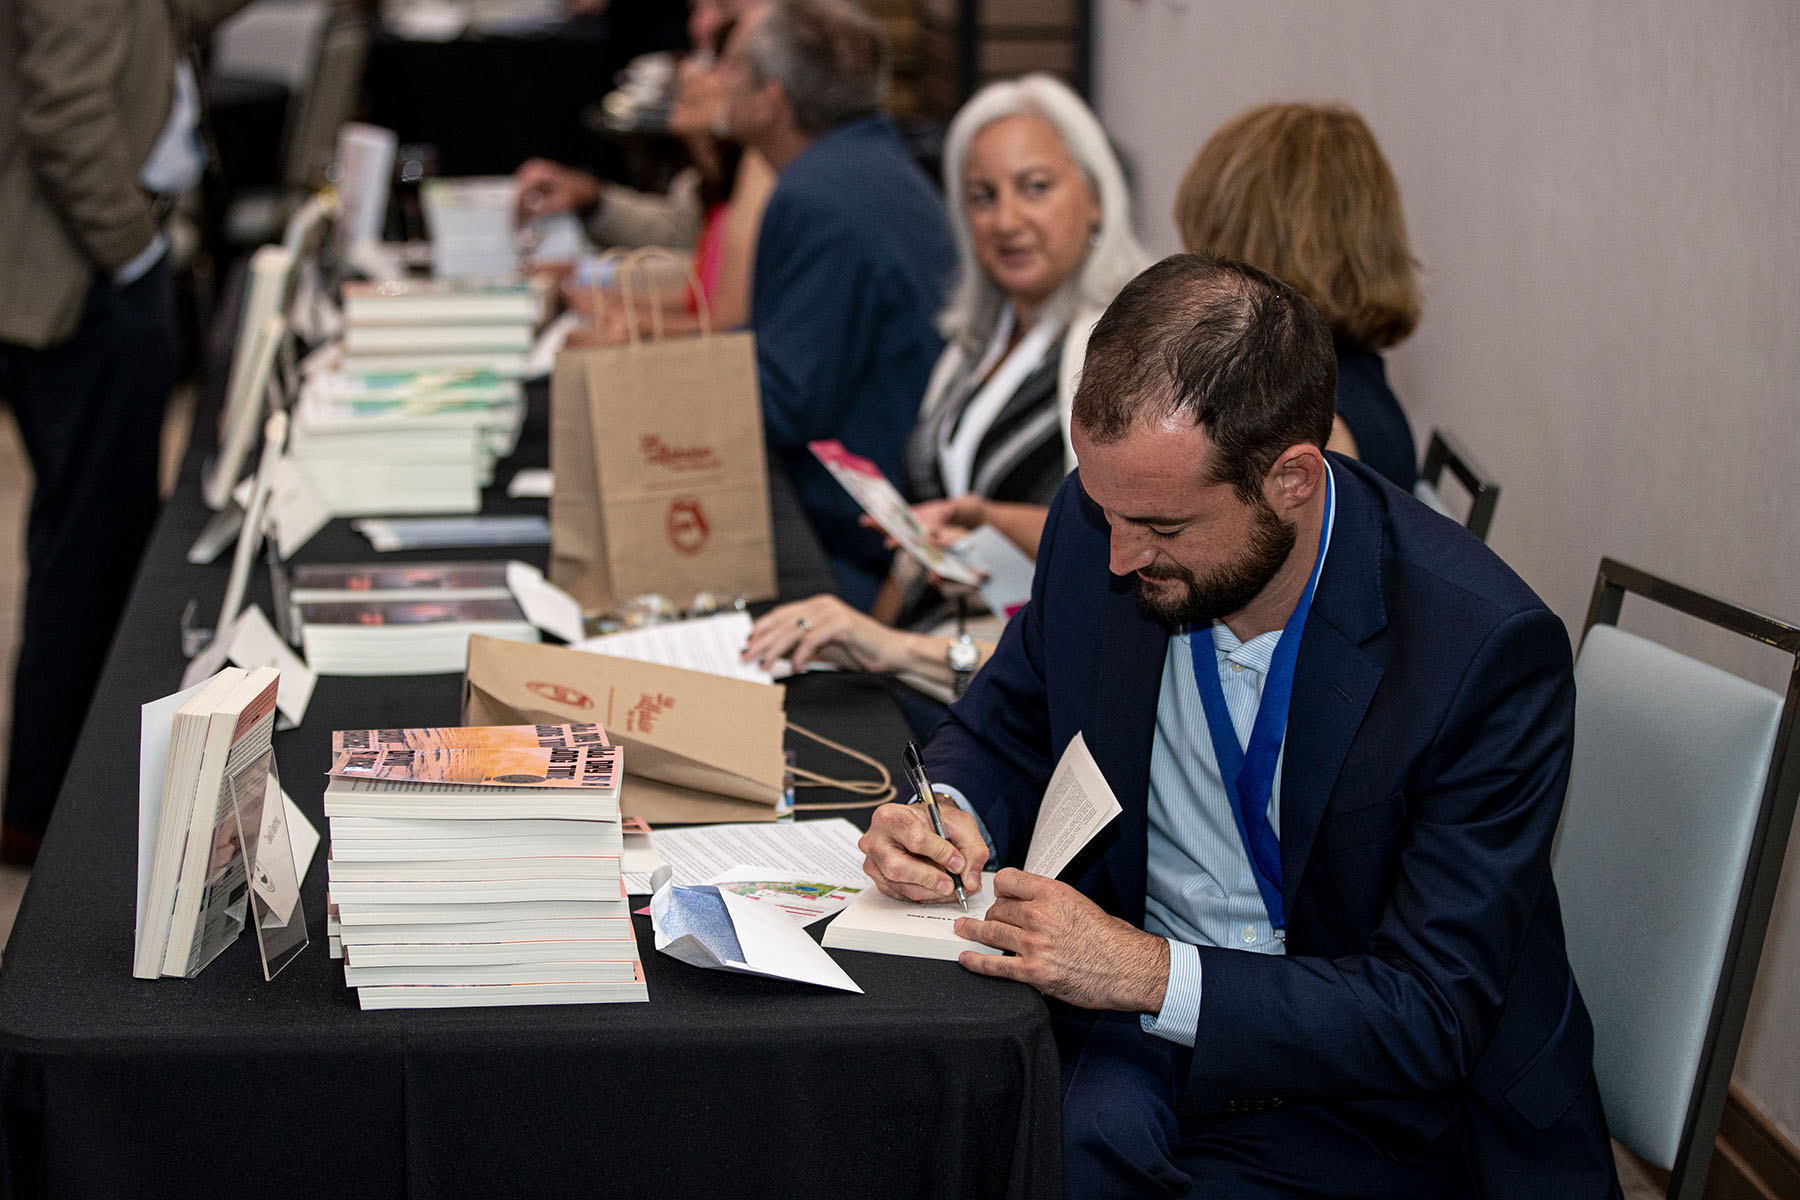 Florida Book Award winners signing books at the 2022 awards ceremony. (Steve Chase of Chase Photography)